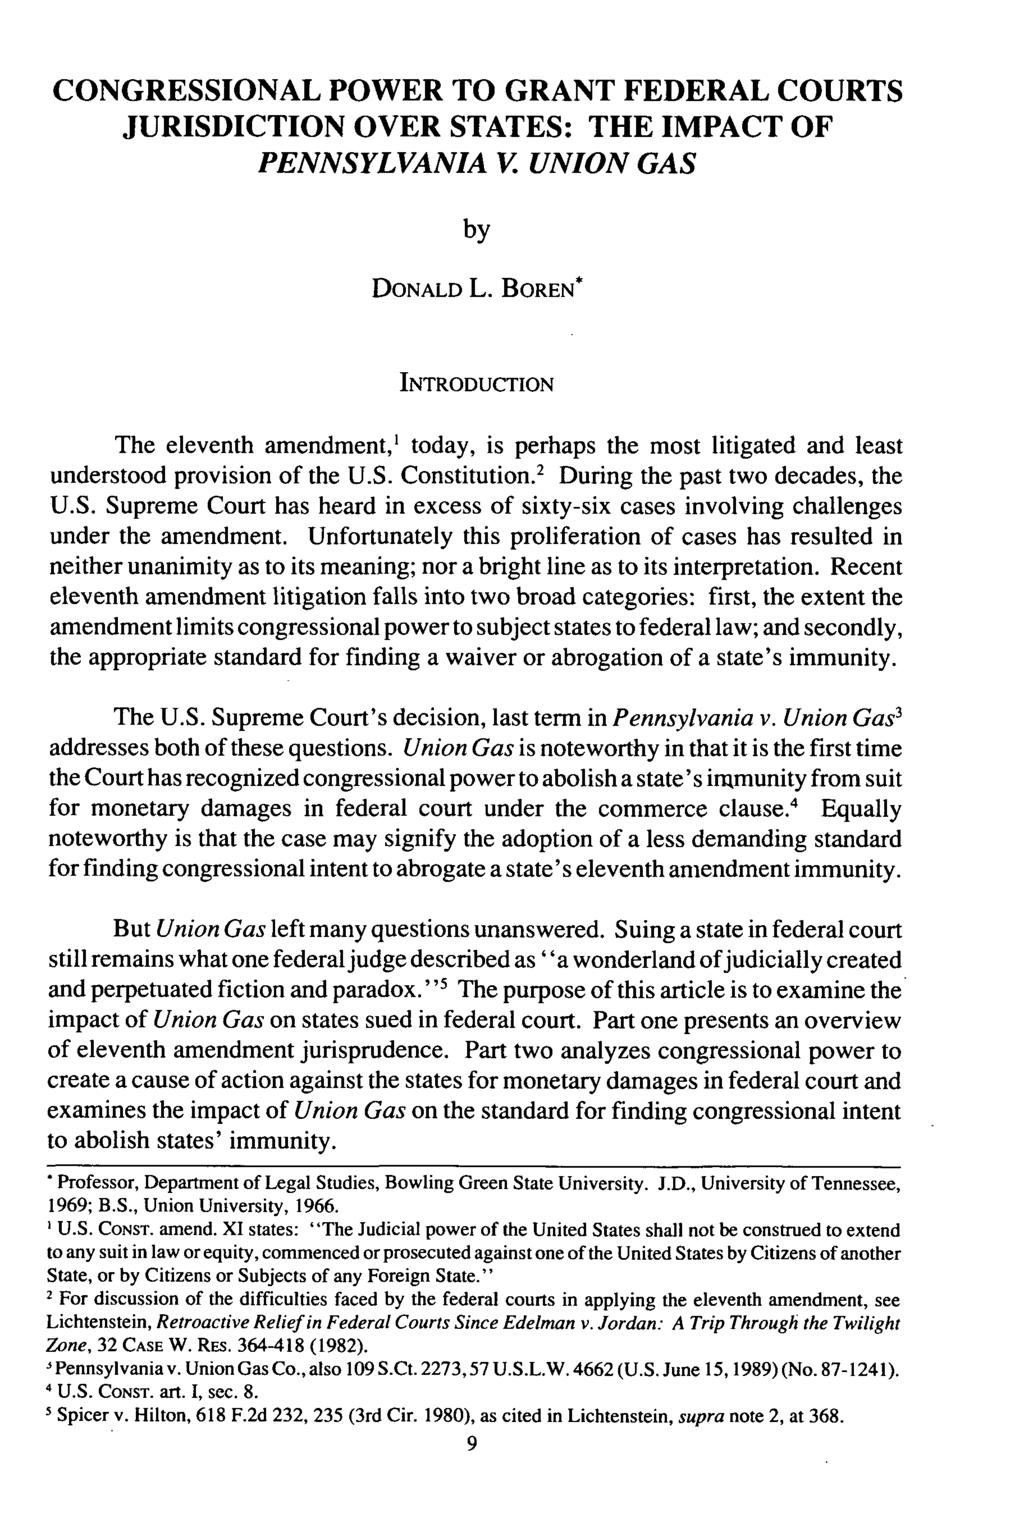 Boren: Congressional Power Over States CONGRESSIONAL POWER TO GRANT FEDERAL COURTS JURISDICTION OVER STATES: THE IMPACT OF PENNSYLVANIA V. UNION GAS by DONALD L.